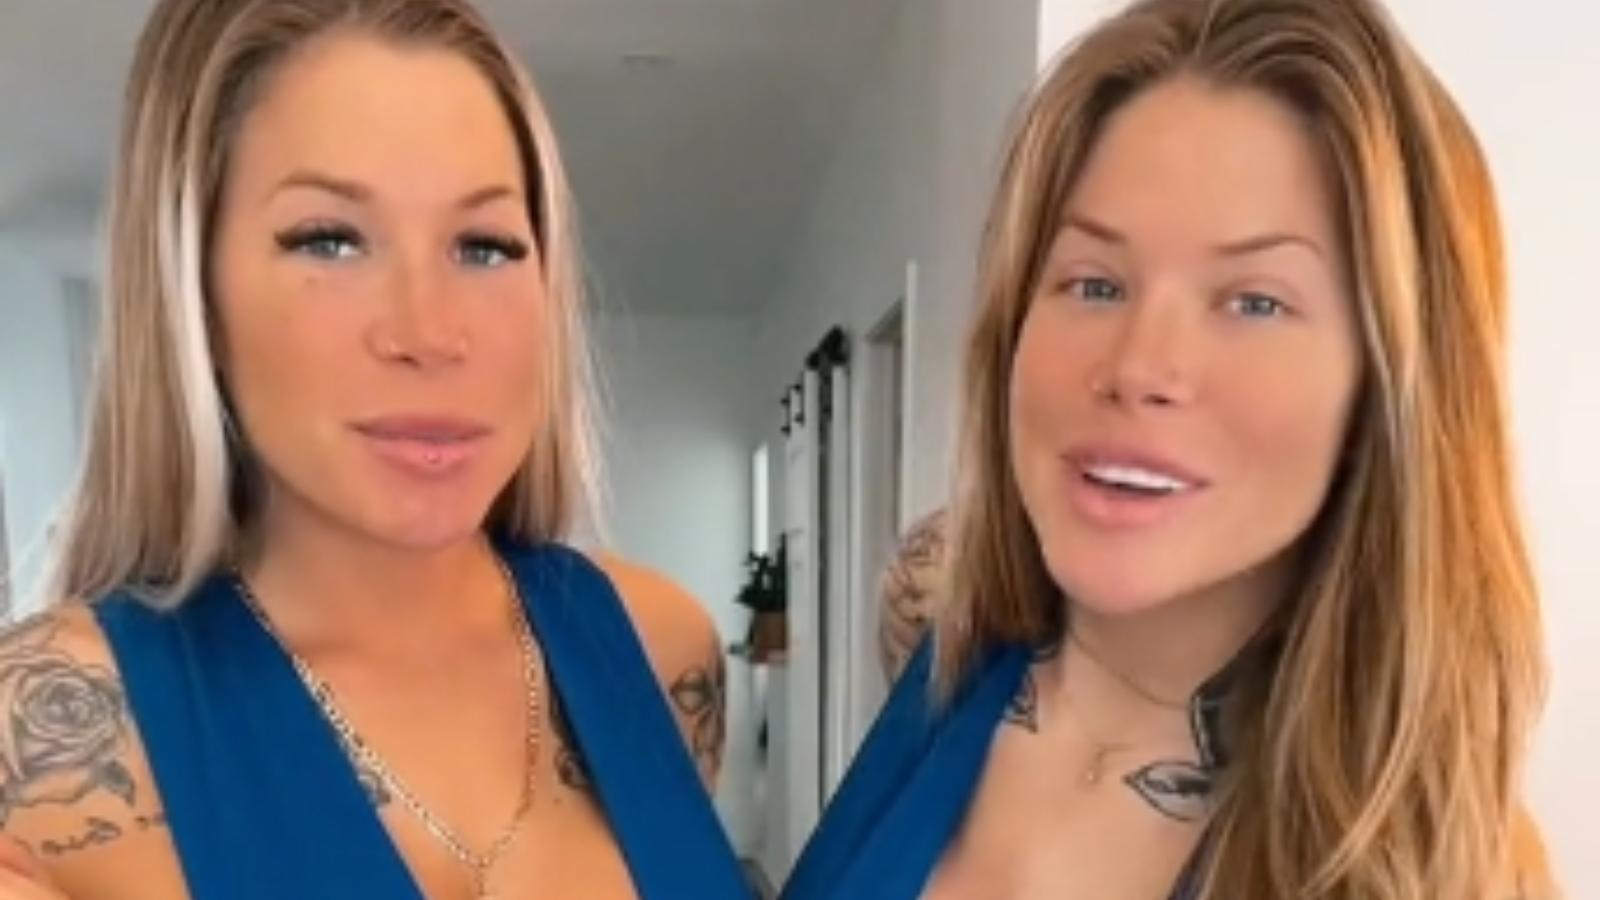 onlyfans twins having tax issues